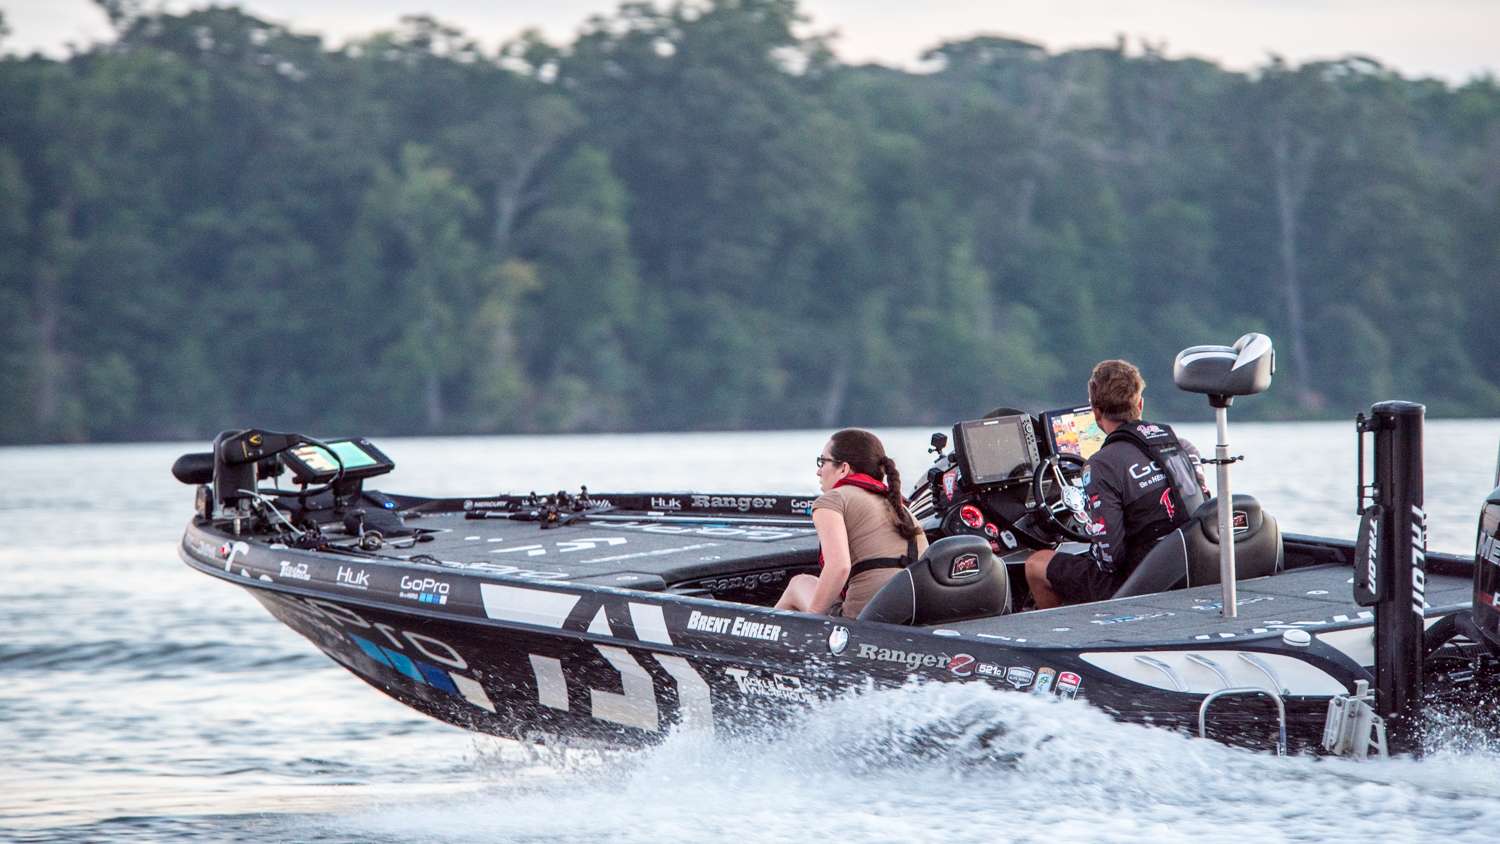 A strong showing on the Potomac River has helped Brent Ehrler move up to 31 in the AOY race. 